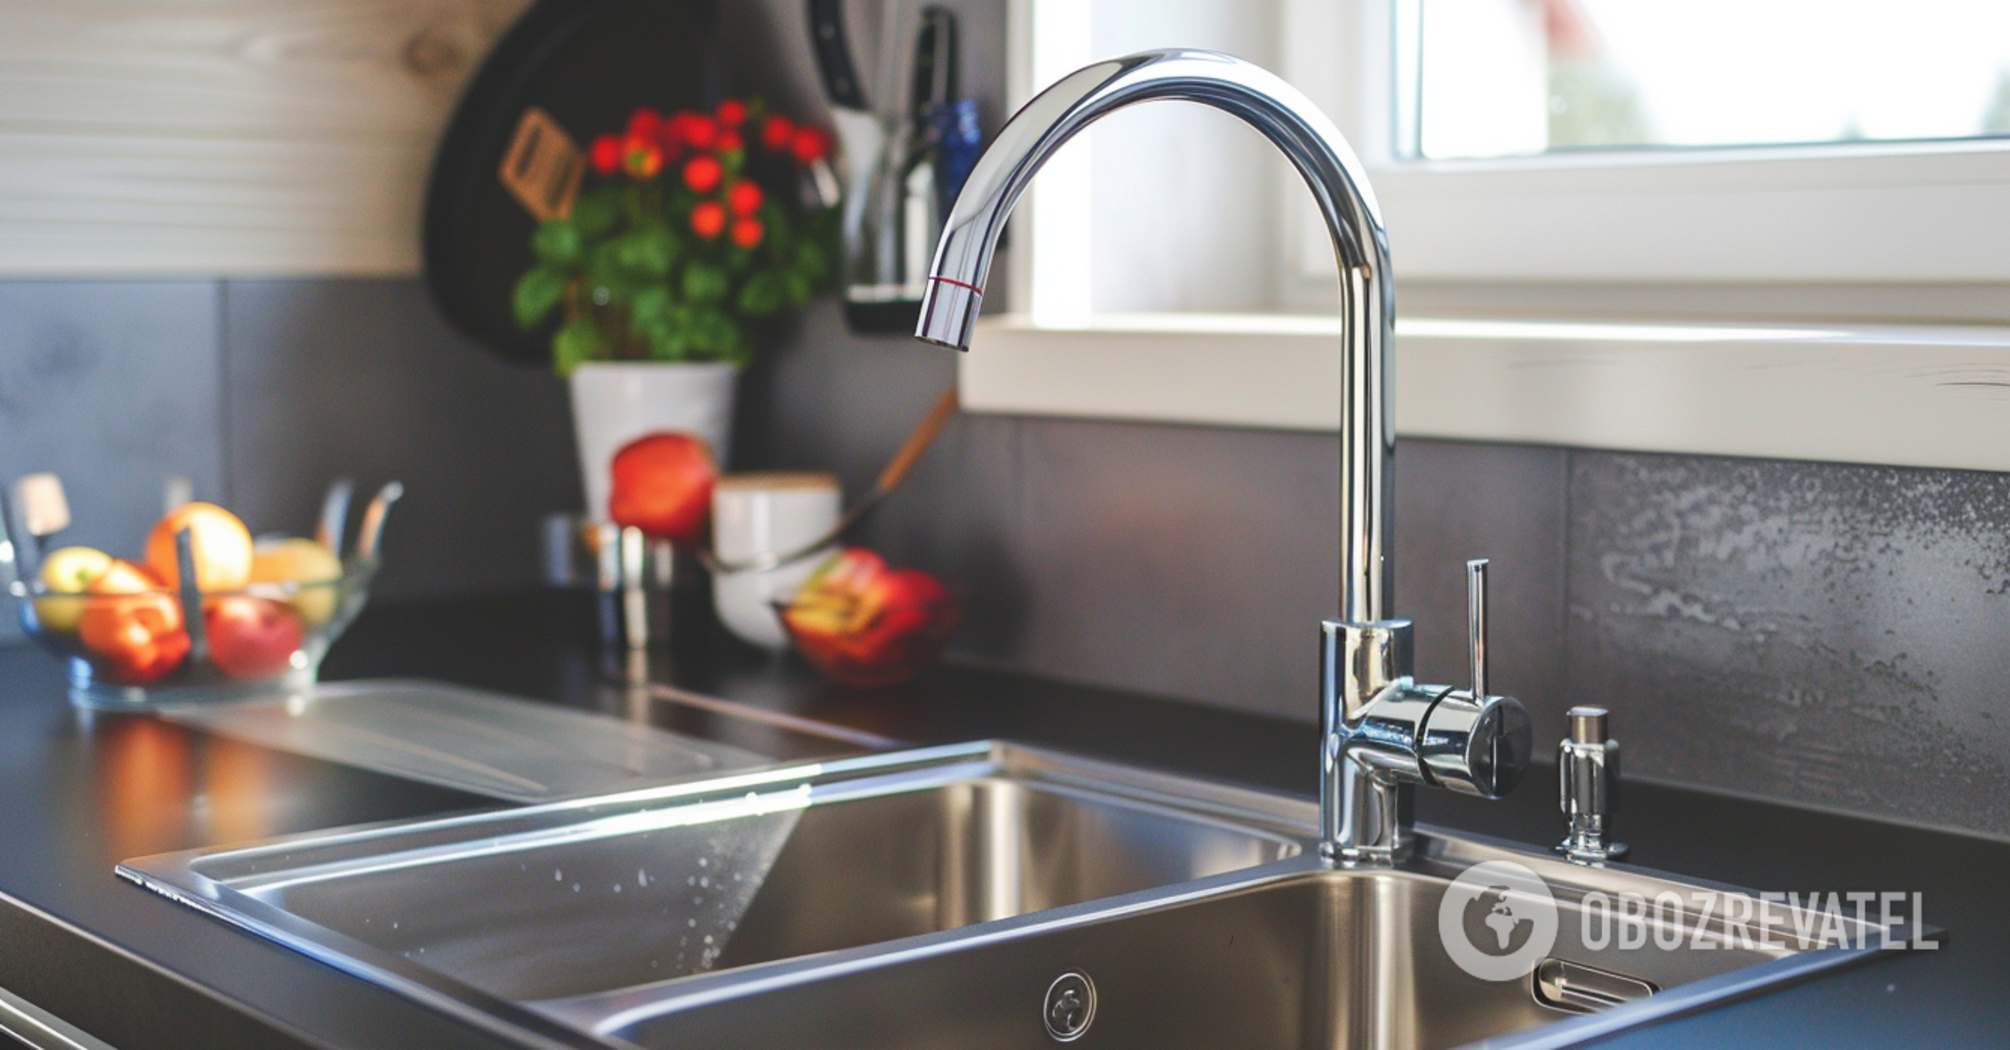 No need for bleach: how to disinfect the sink